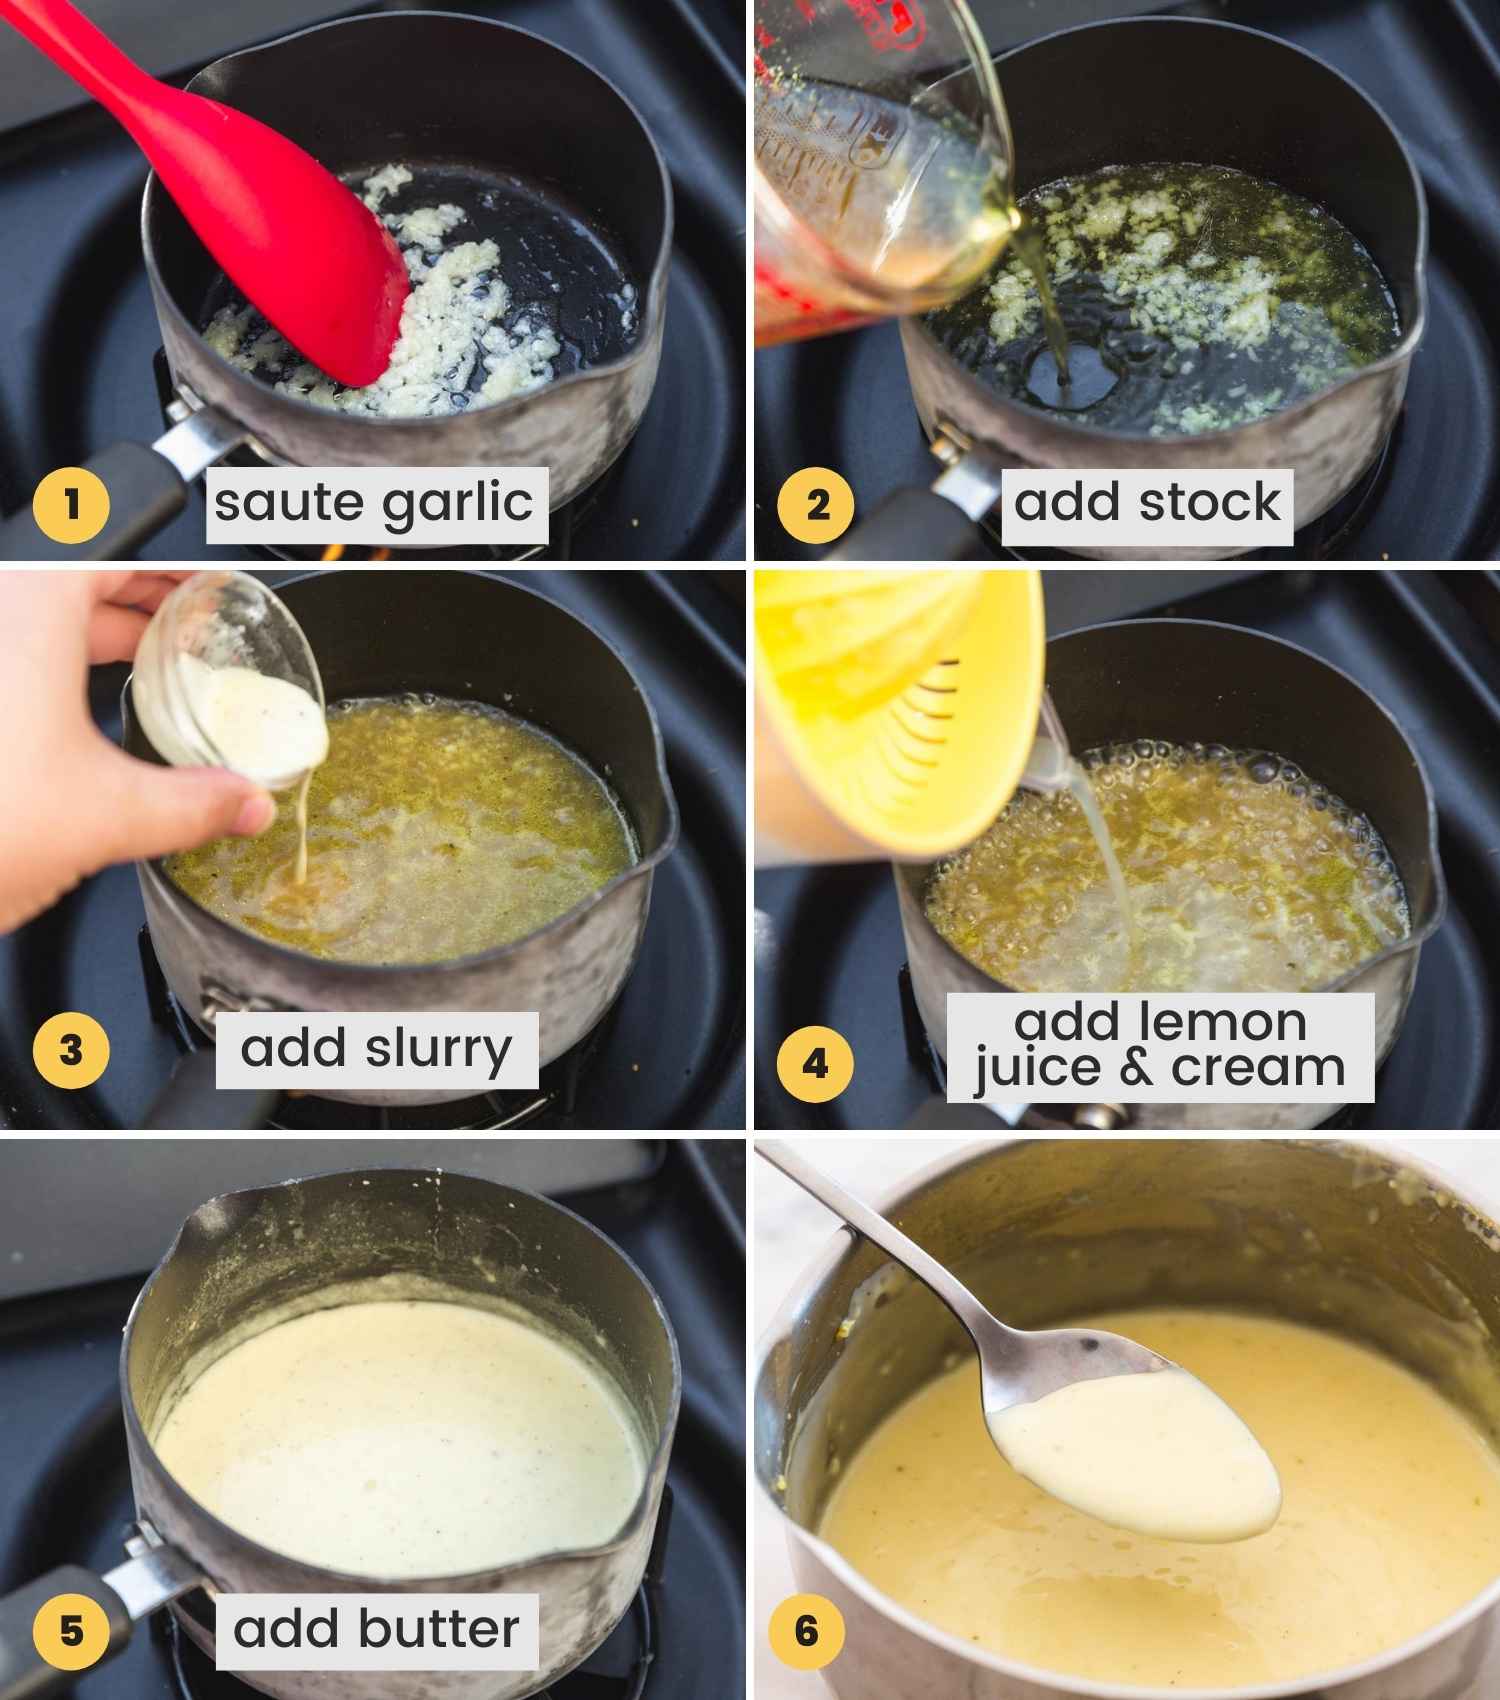 A collage with 6 images showing how to make piccata sauce